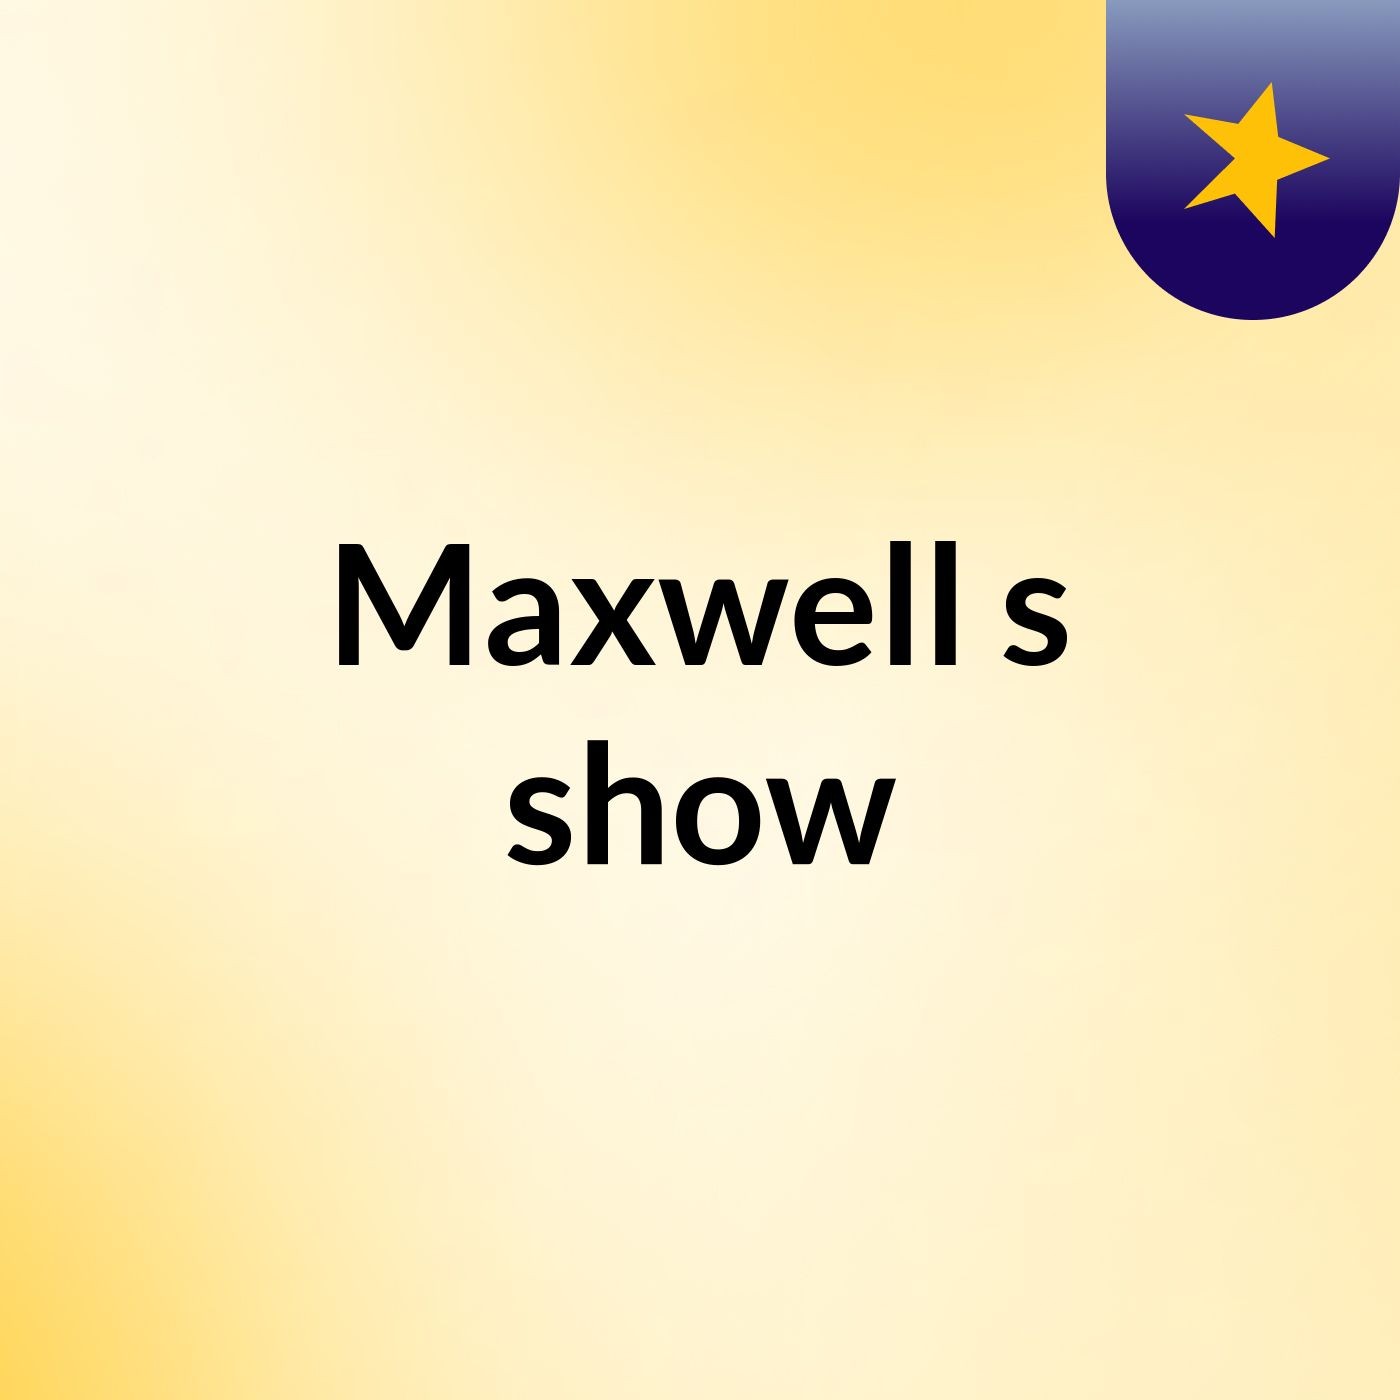 Maxwell's show